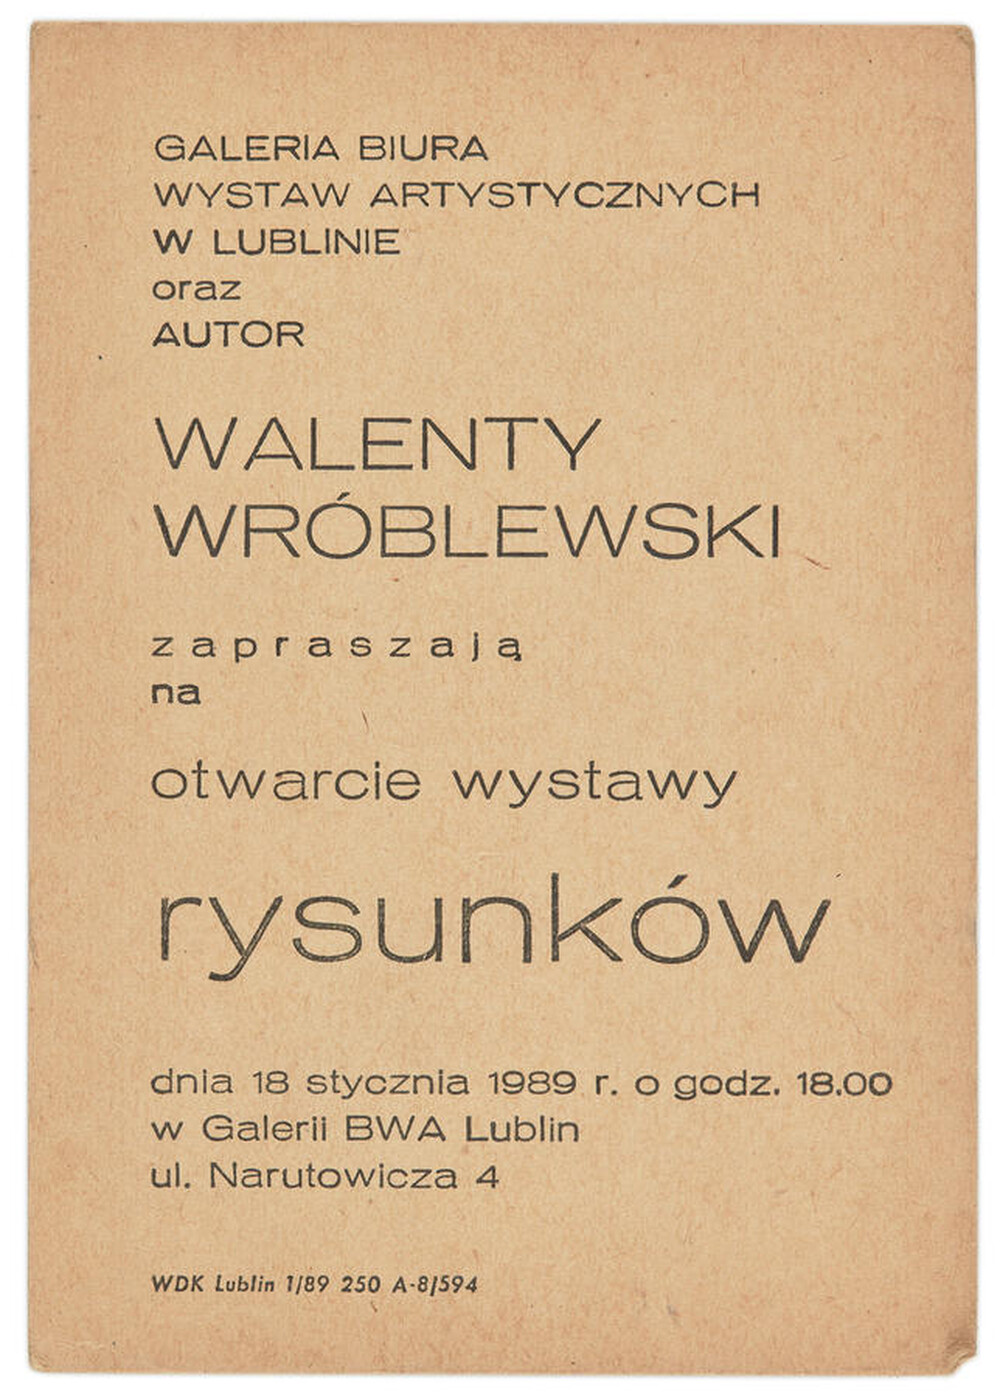 Invitation to an exhibition of drawings by Walenty Wróblewski